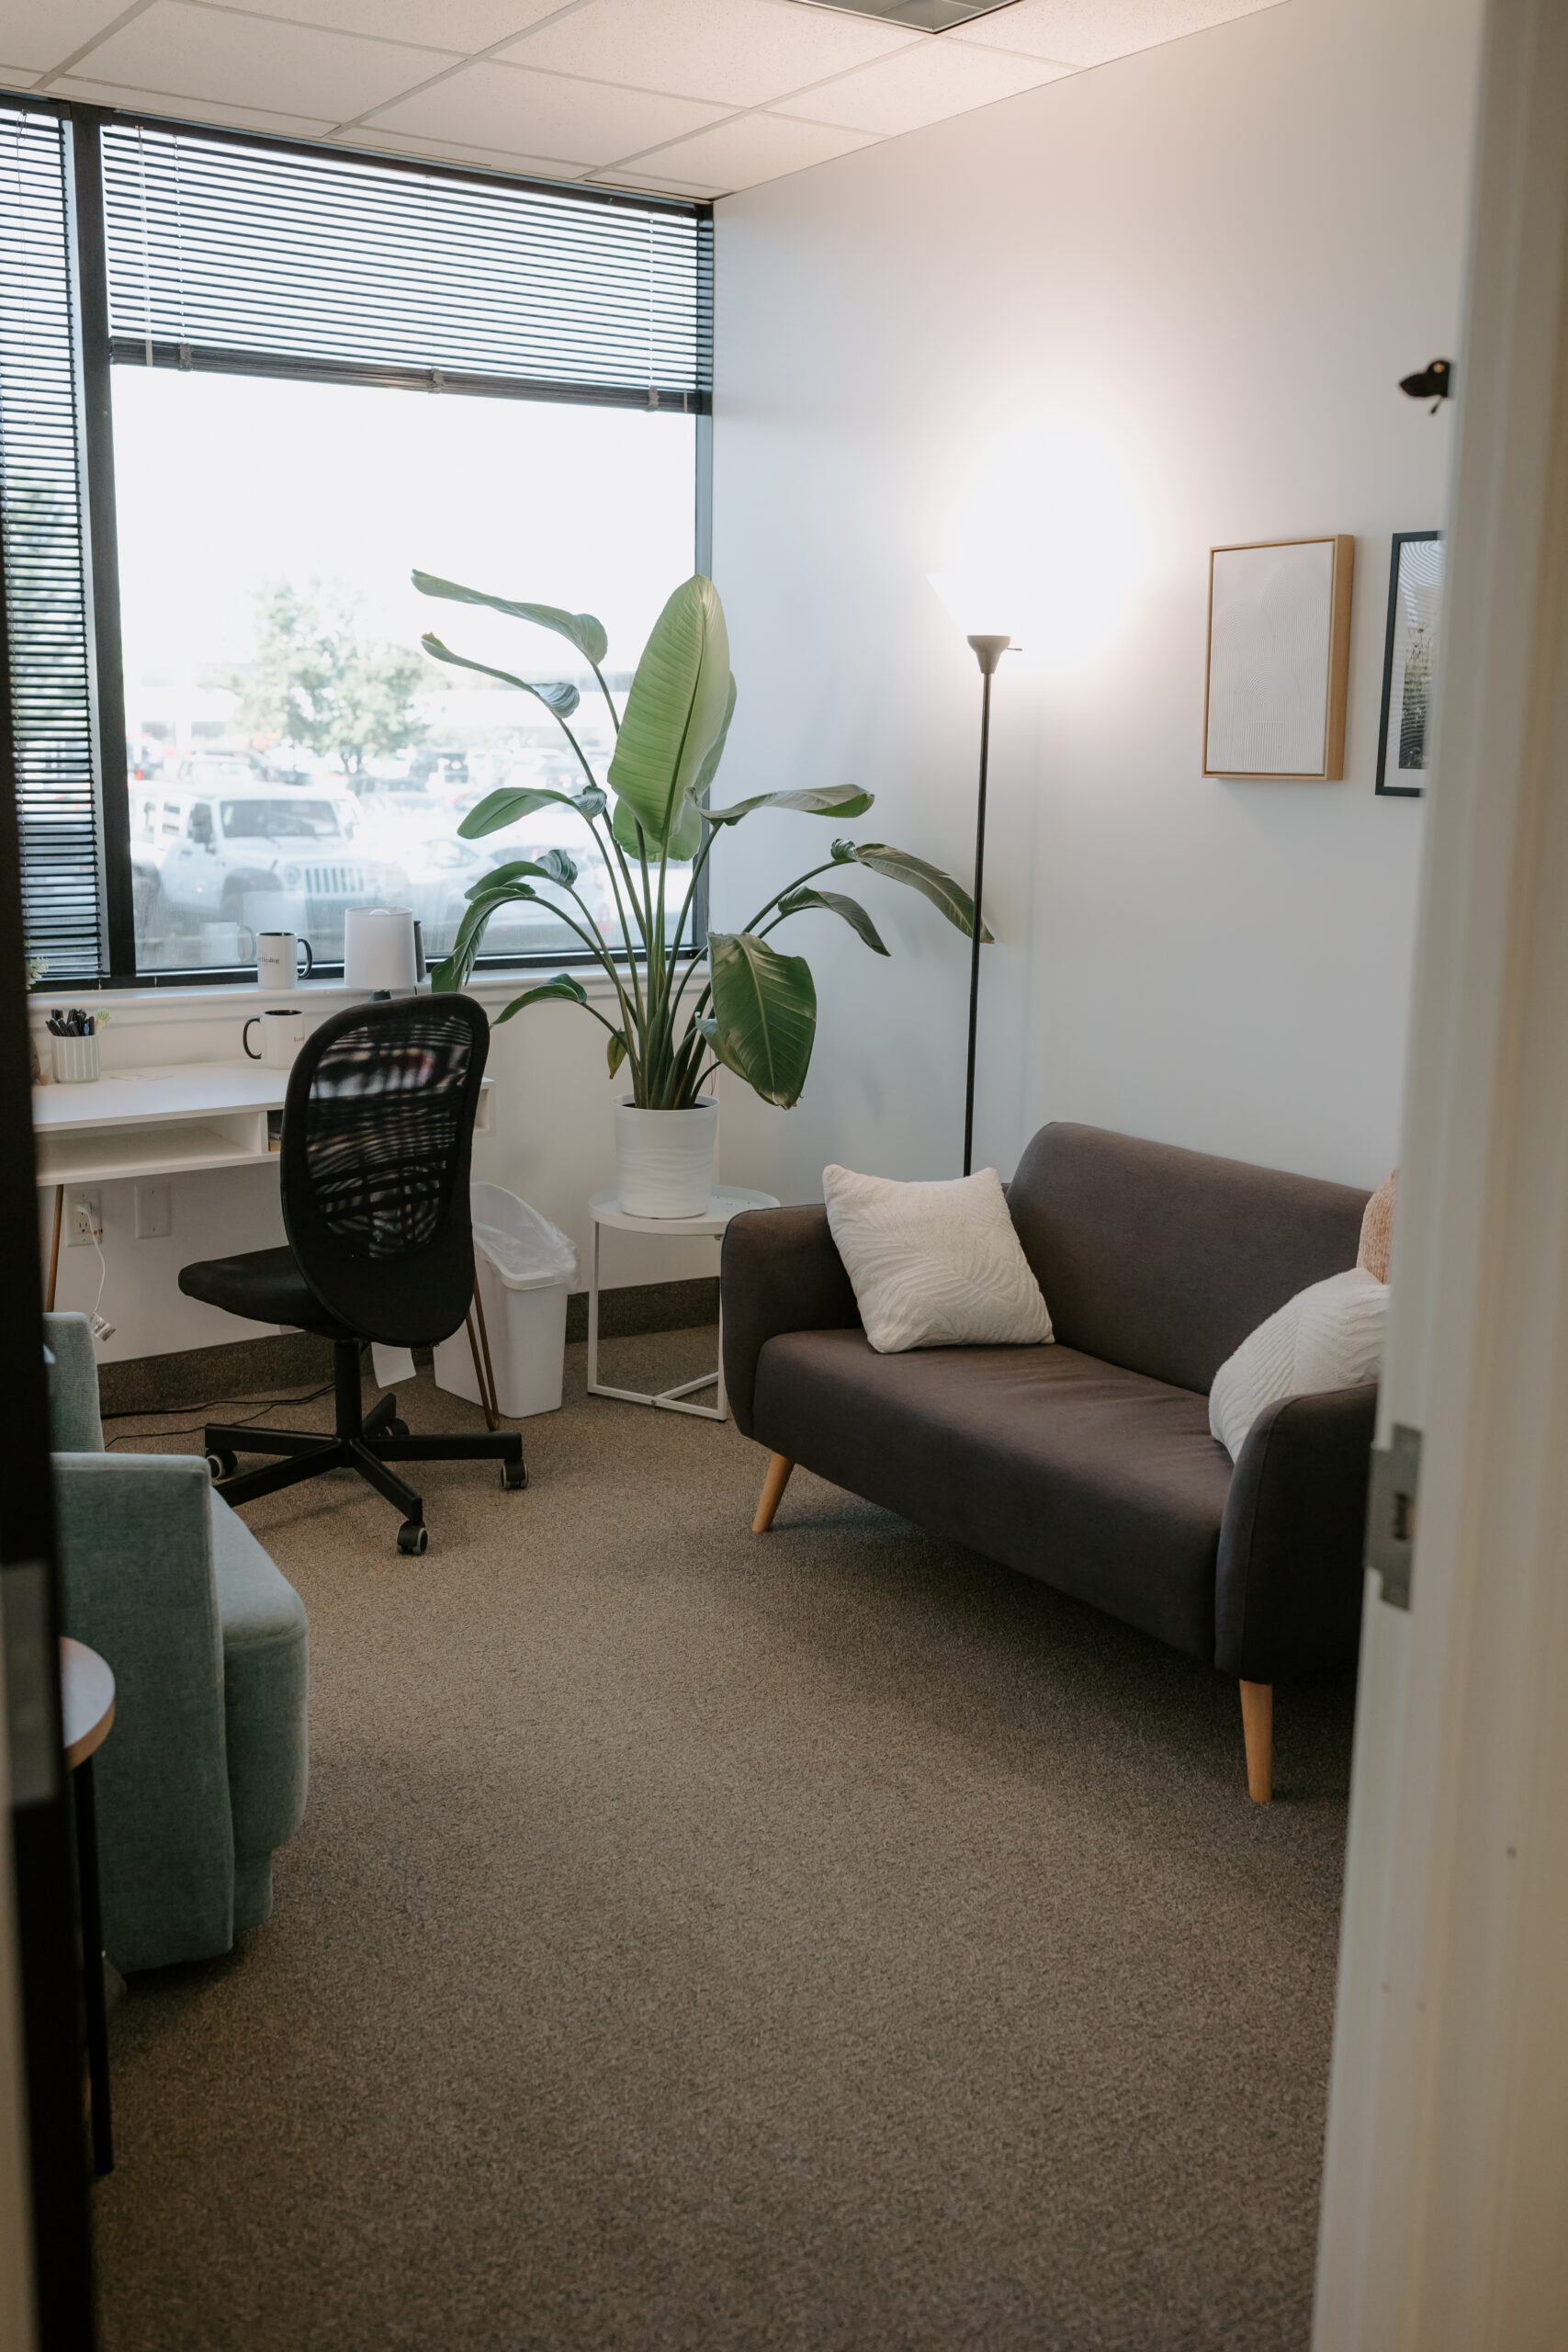 Photo of a therapy office with a couch.